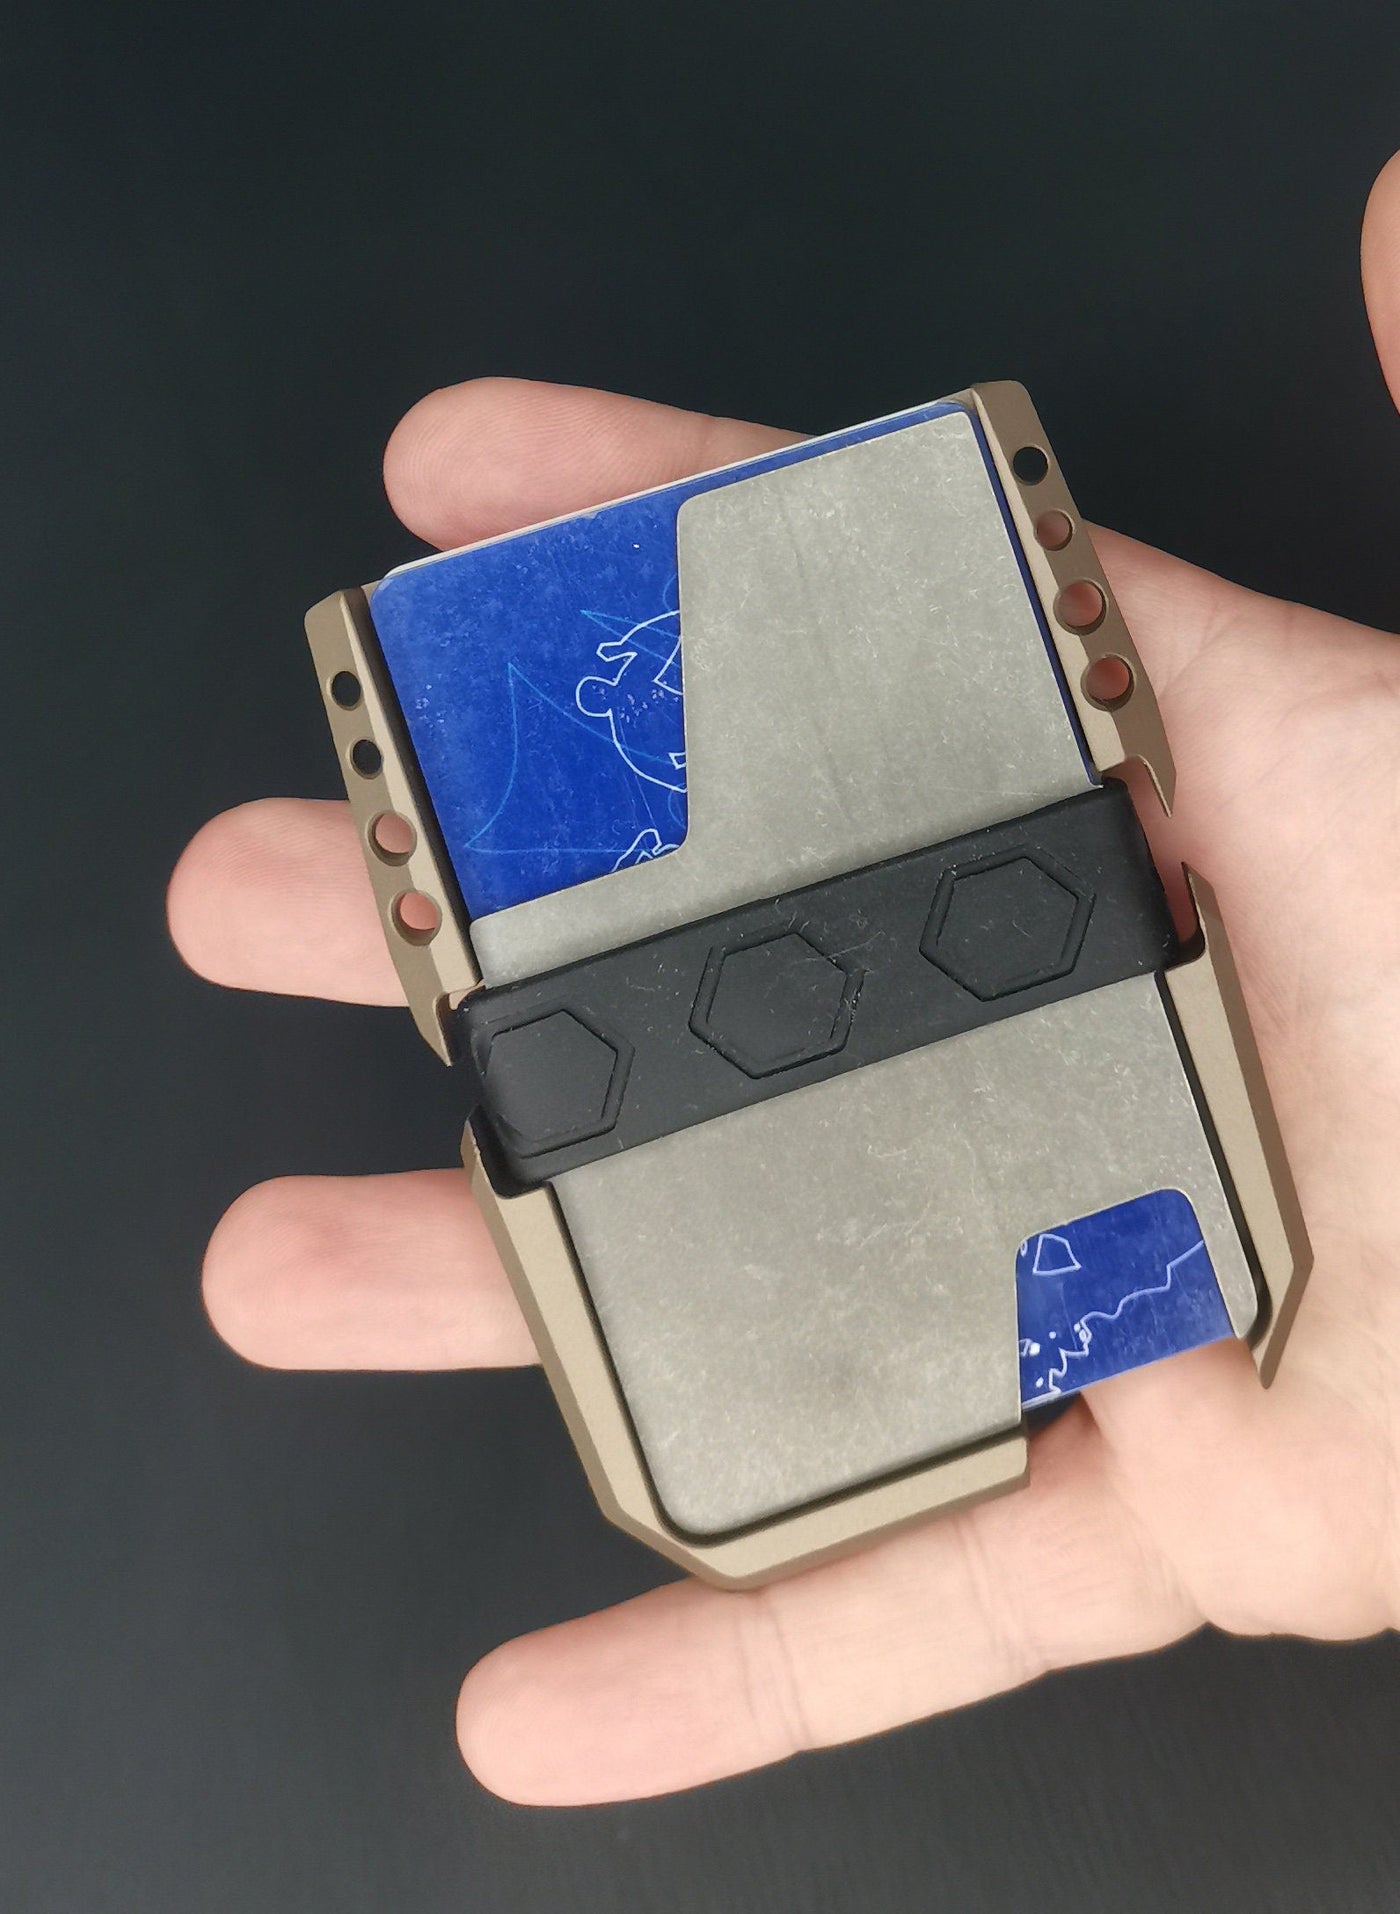 Titanium tactical cardholder for on-the-go use